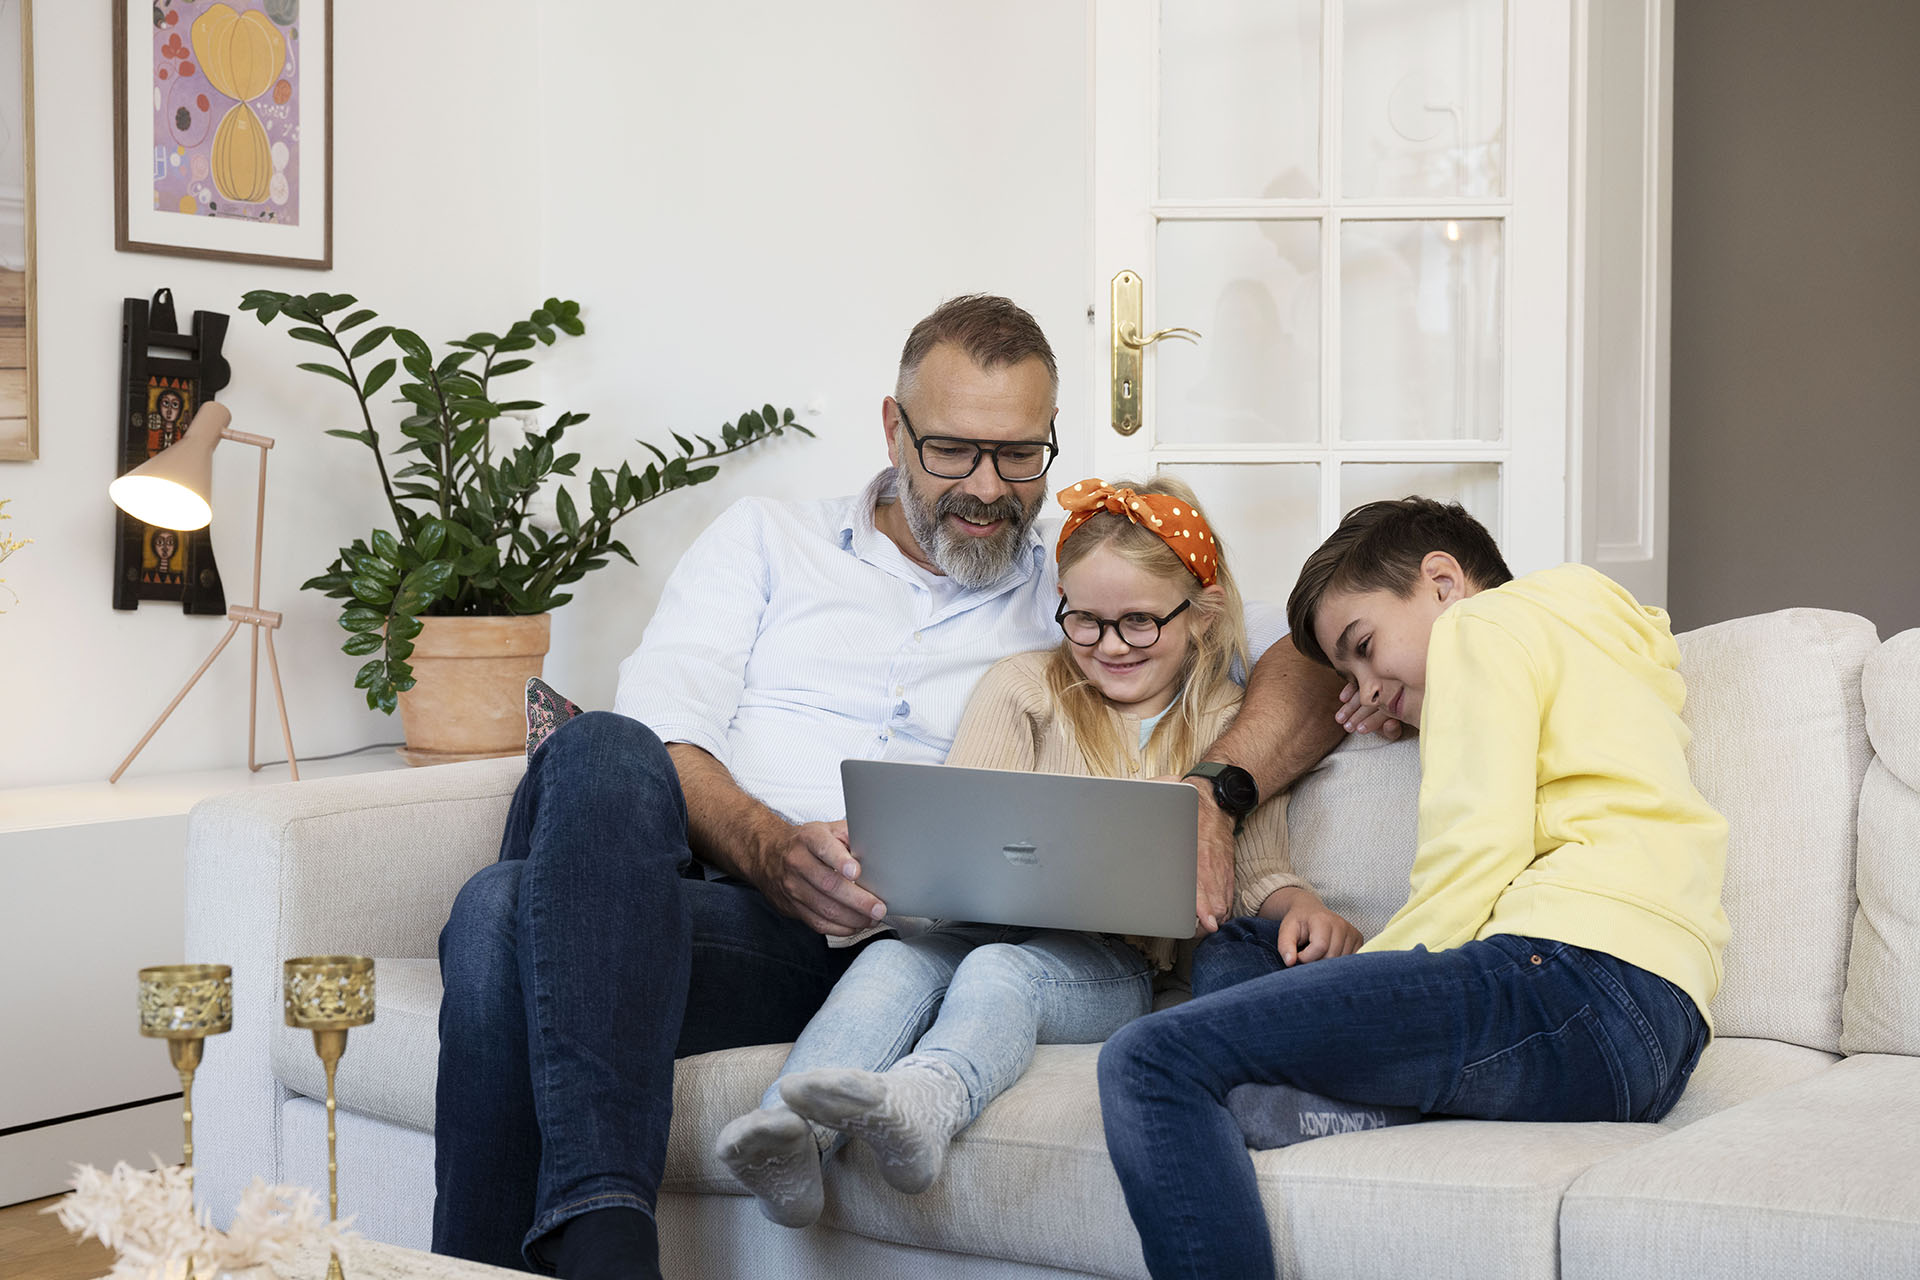 A man and two children are sitting on a white sofa and laughing at something on the computer